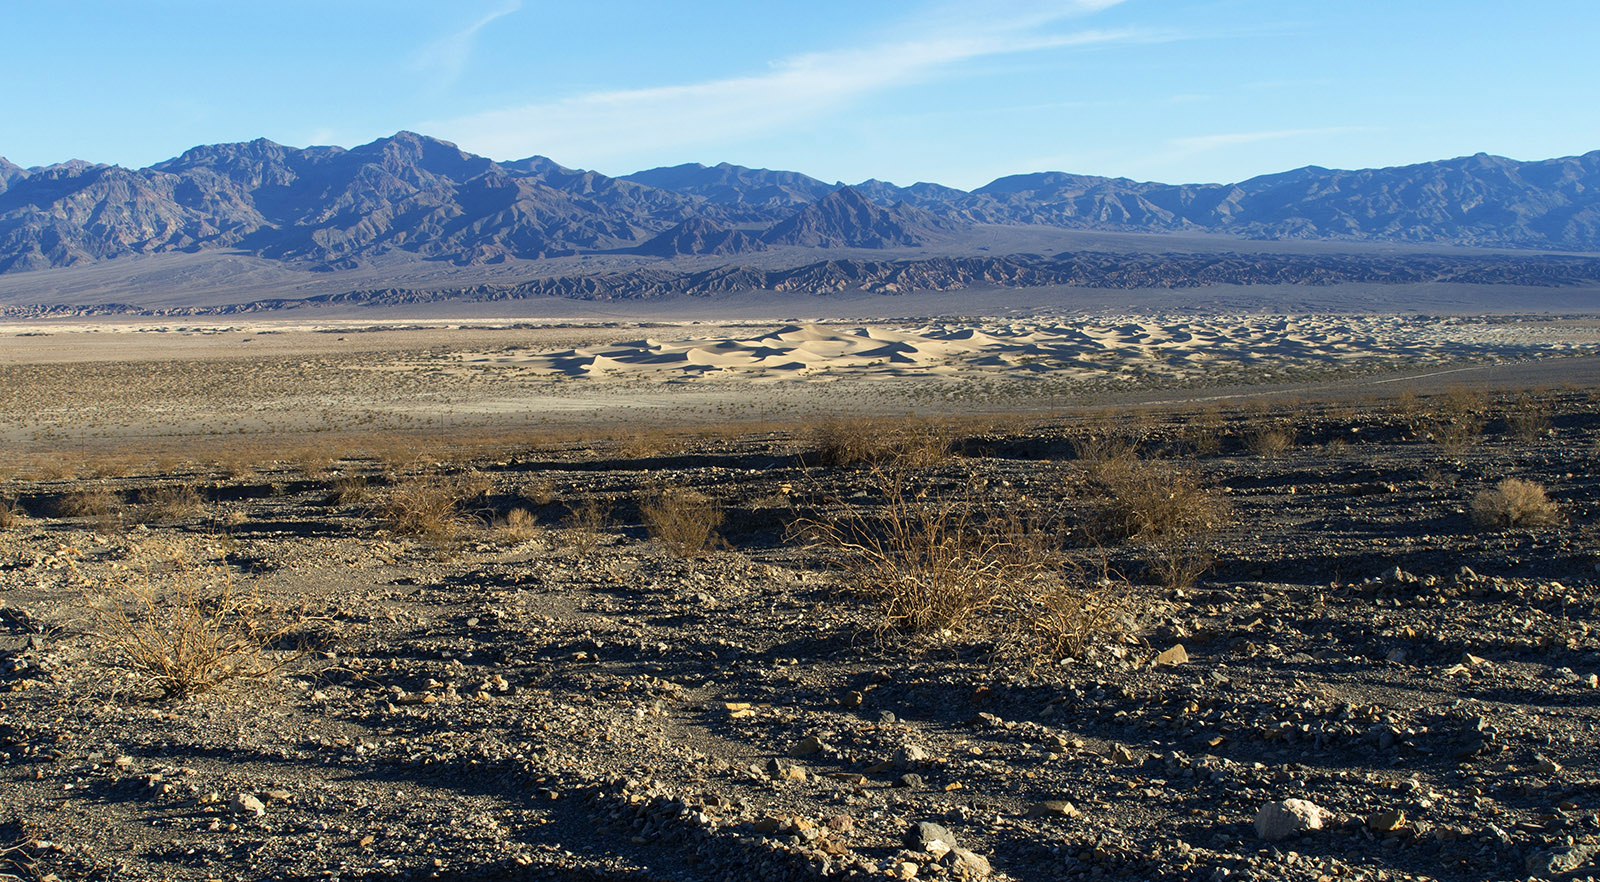 View from the alluvial fan for Mosaic Canyon with Mesquite Flat Sand Dunes and Grapevine Mountains in the distance.